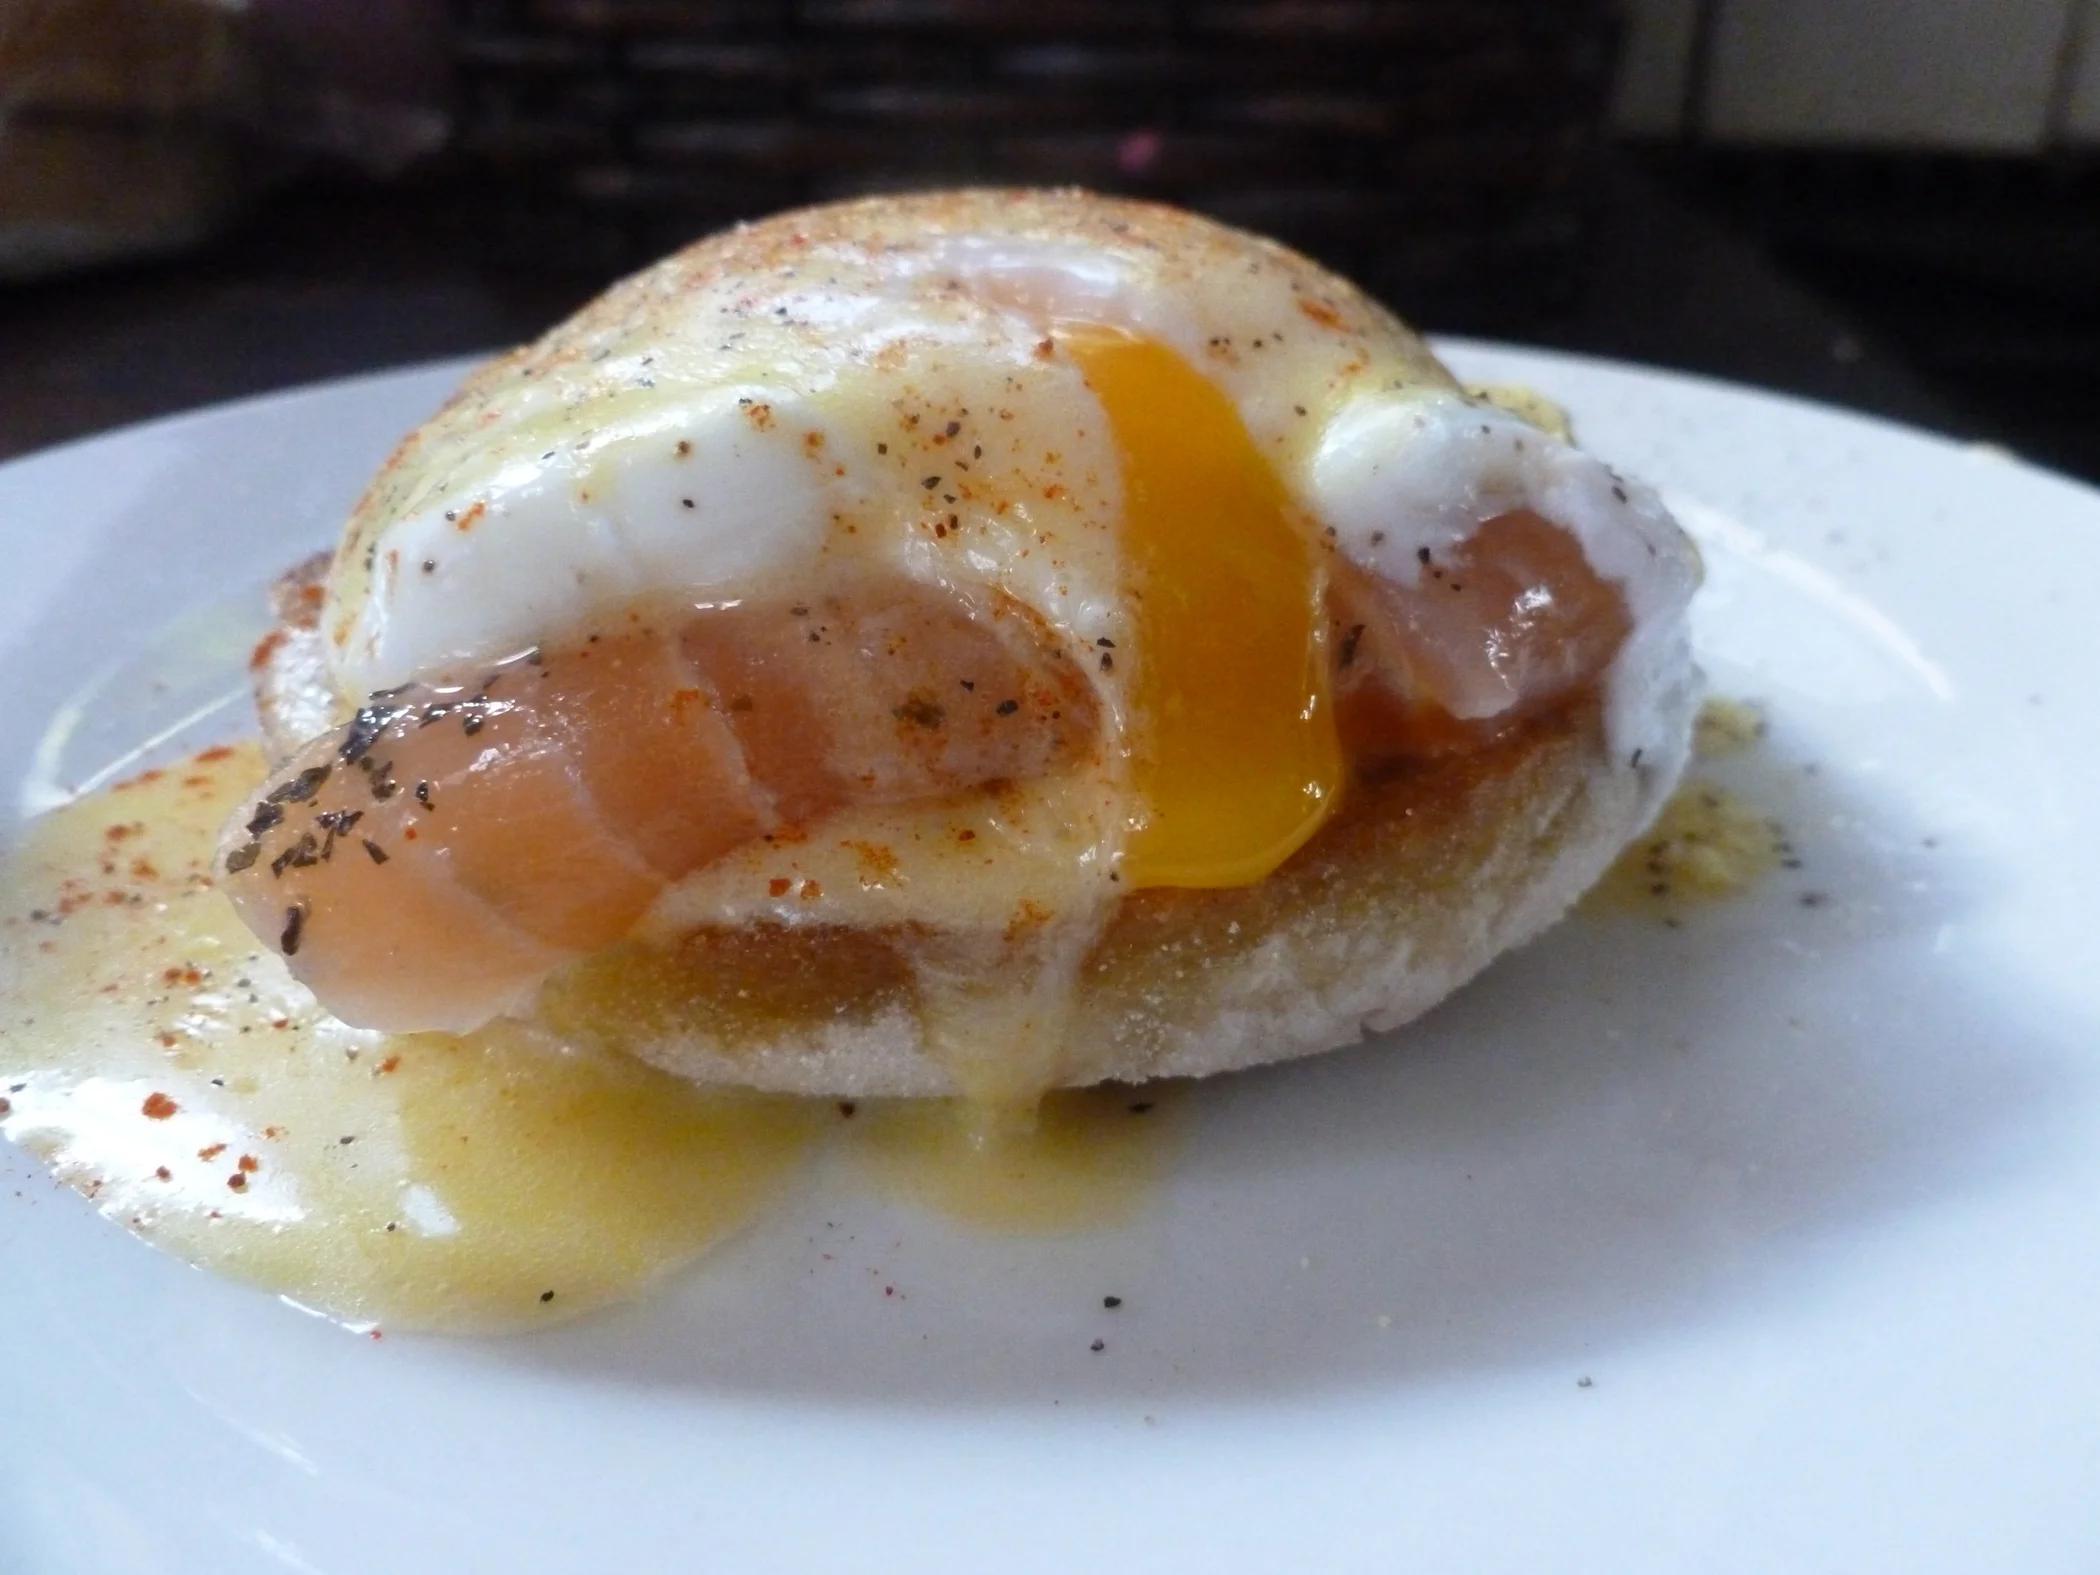 eggs royale smoked salmon - What is the difference between Eggs Royale and Atlantic